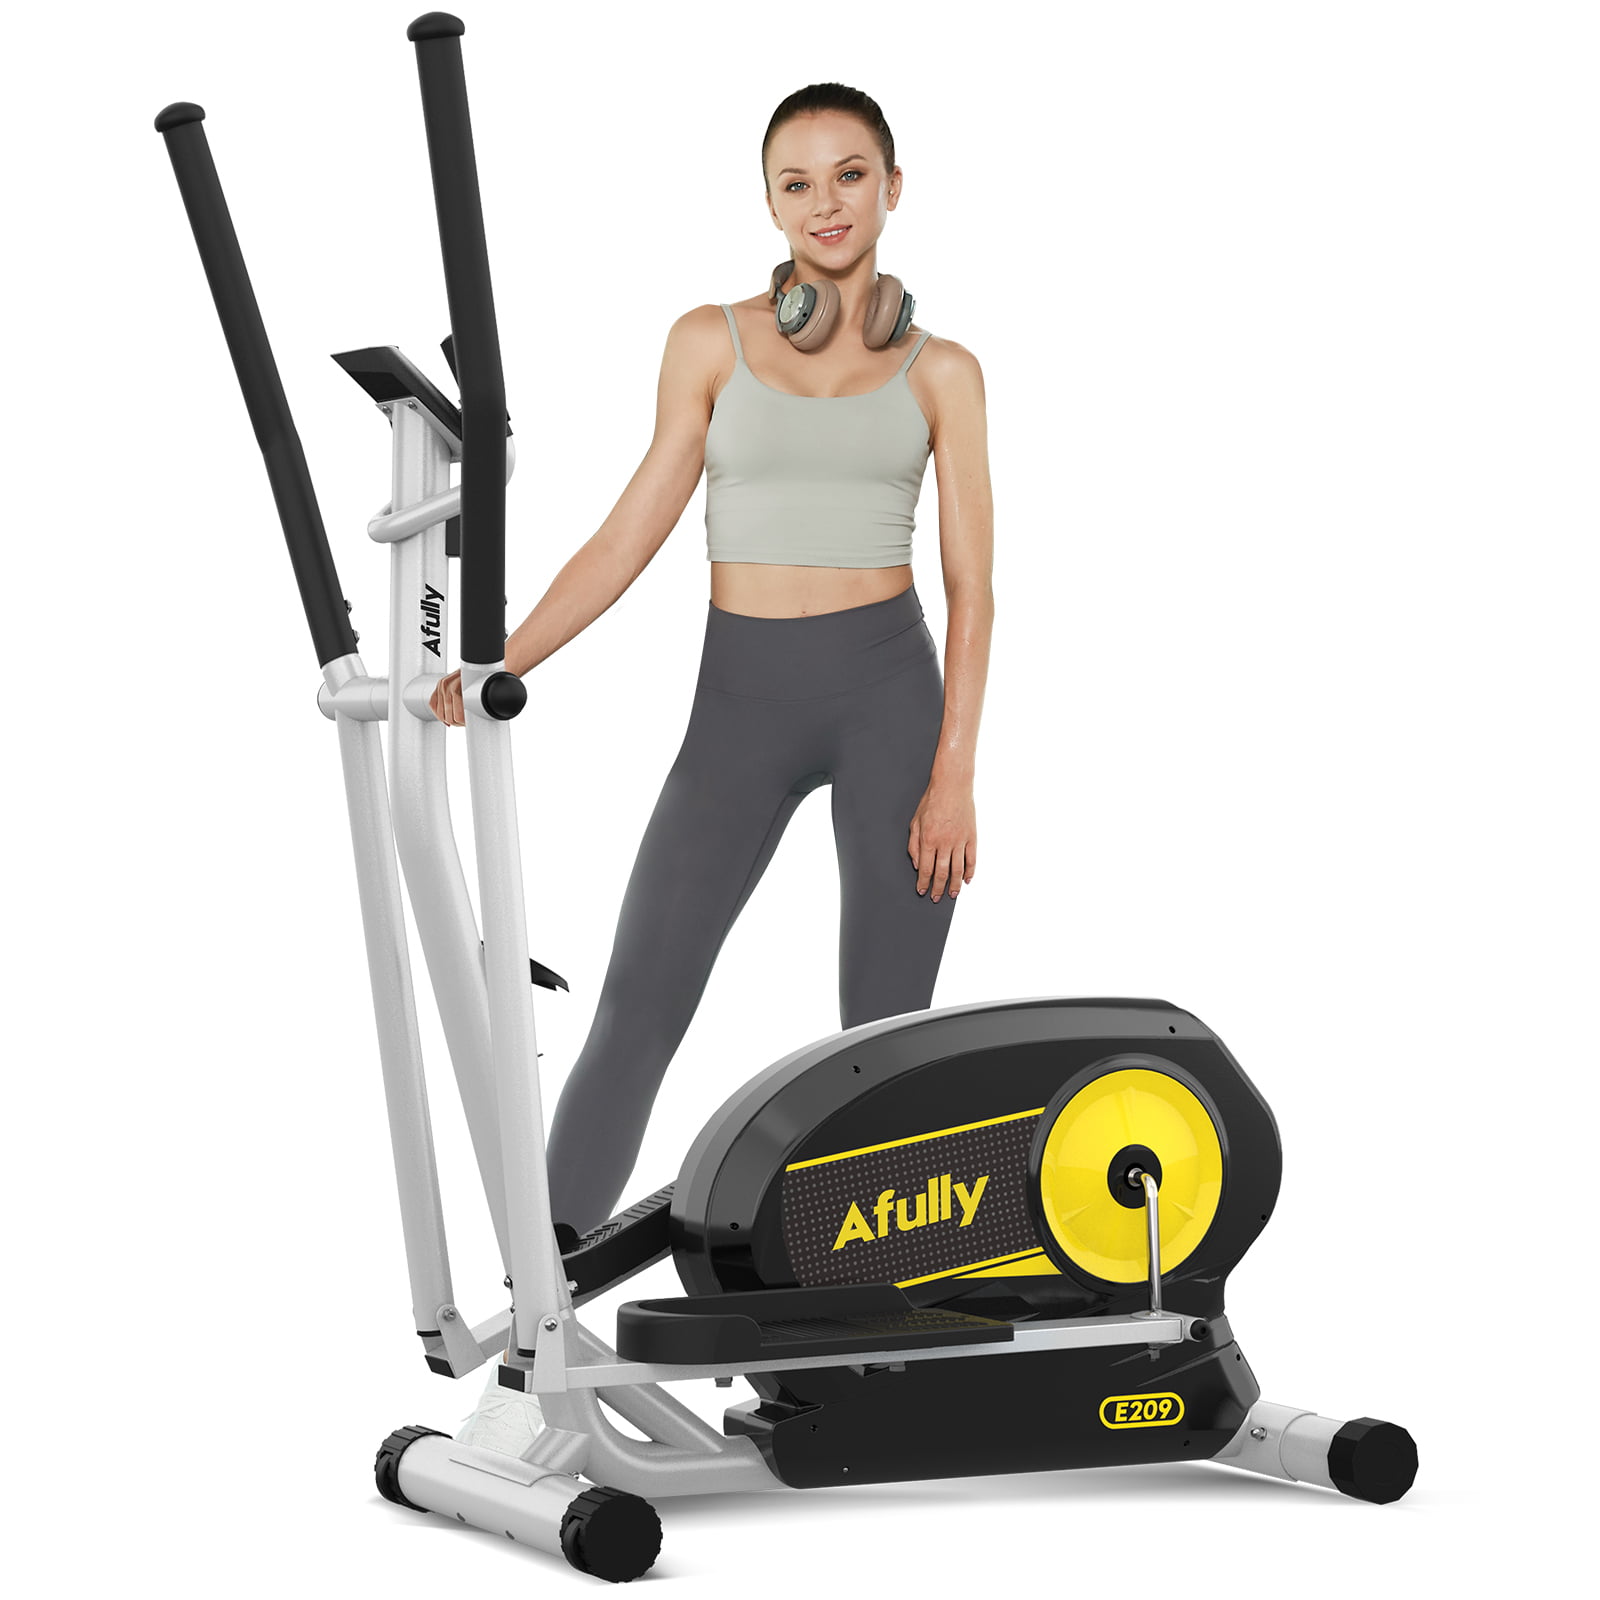 Afully Elliptical Machine with 8 Level Adjustable Magnetic Resistance Elliptical Machine for Home Use Max Capacity Weight 350LBS Elliptical Trainer with LCD Monitor 